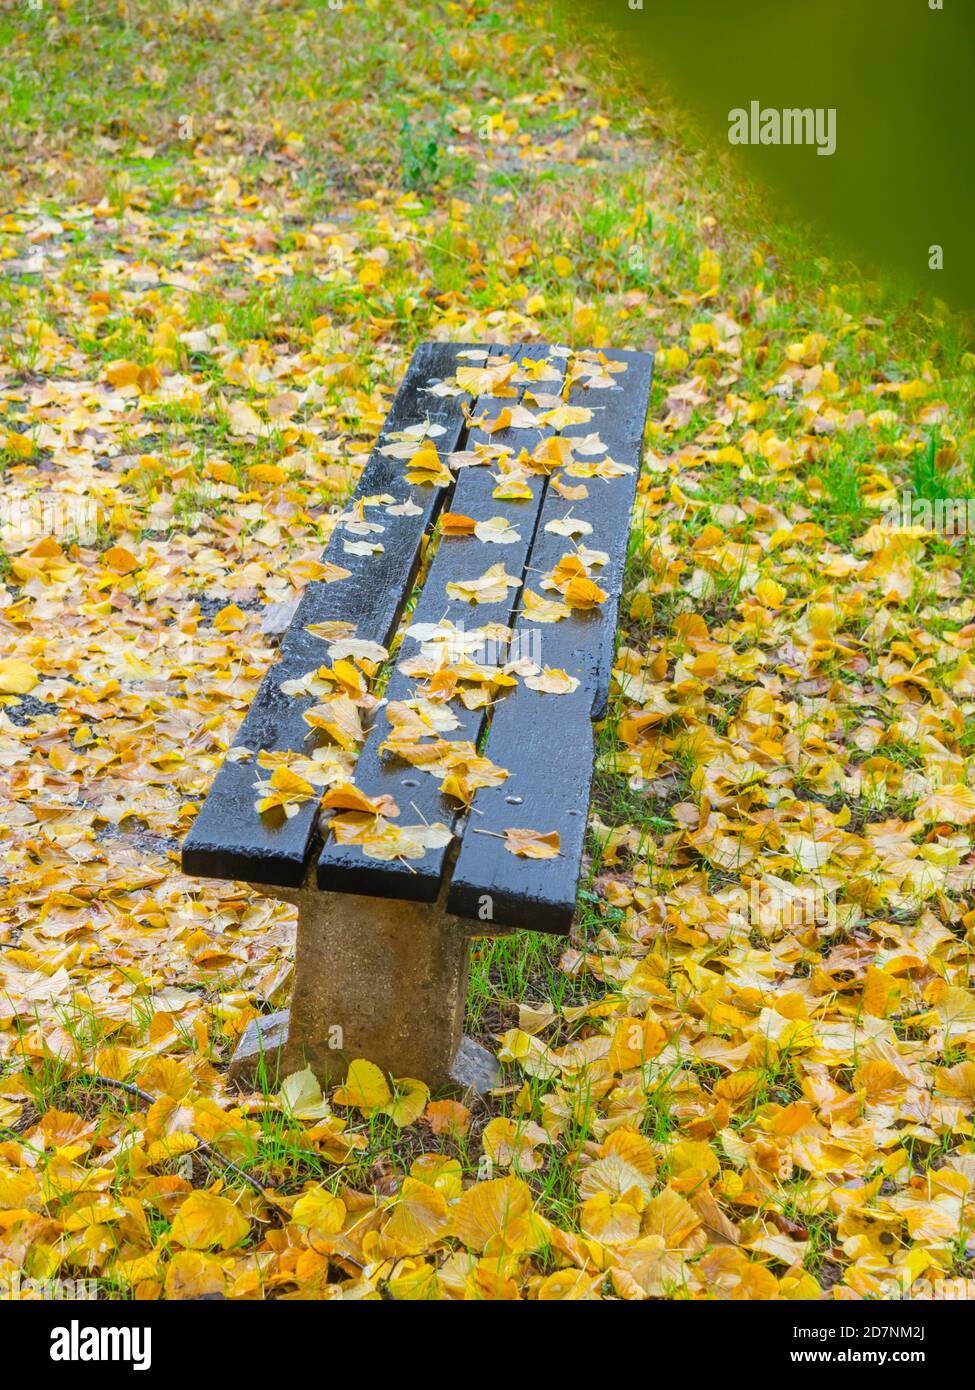 Fallen leaves on wooden bench in park Autumnal Autumn Fall season isolated behind tree leaf Stock Photo